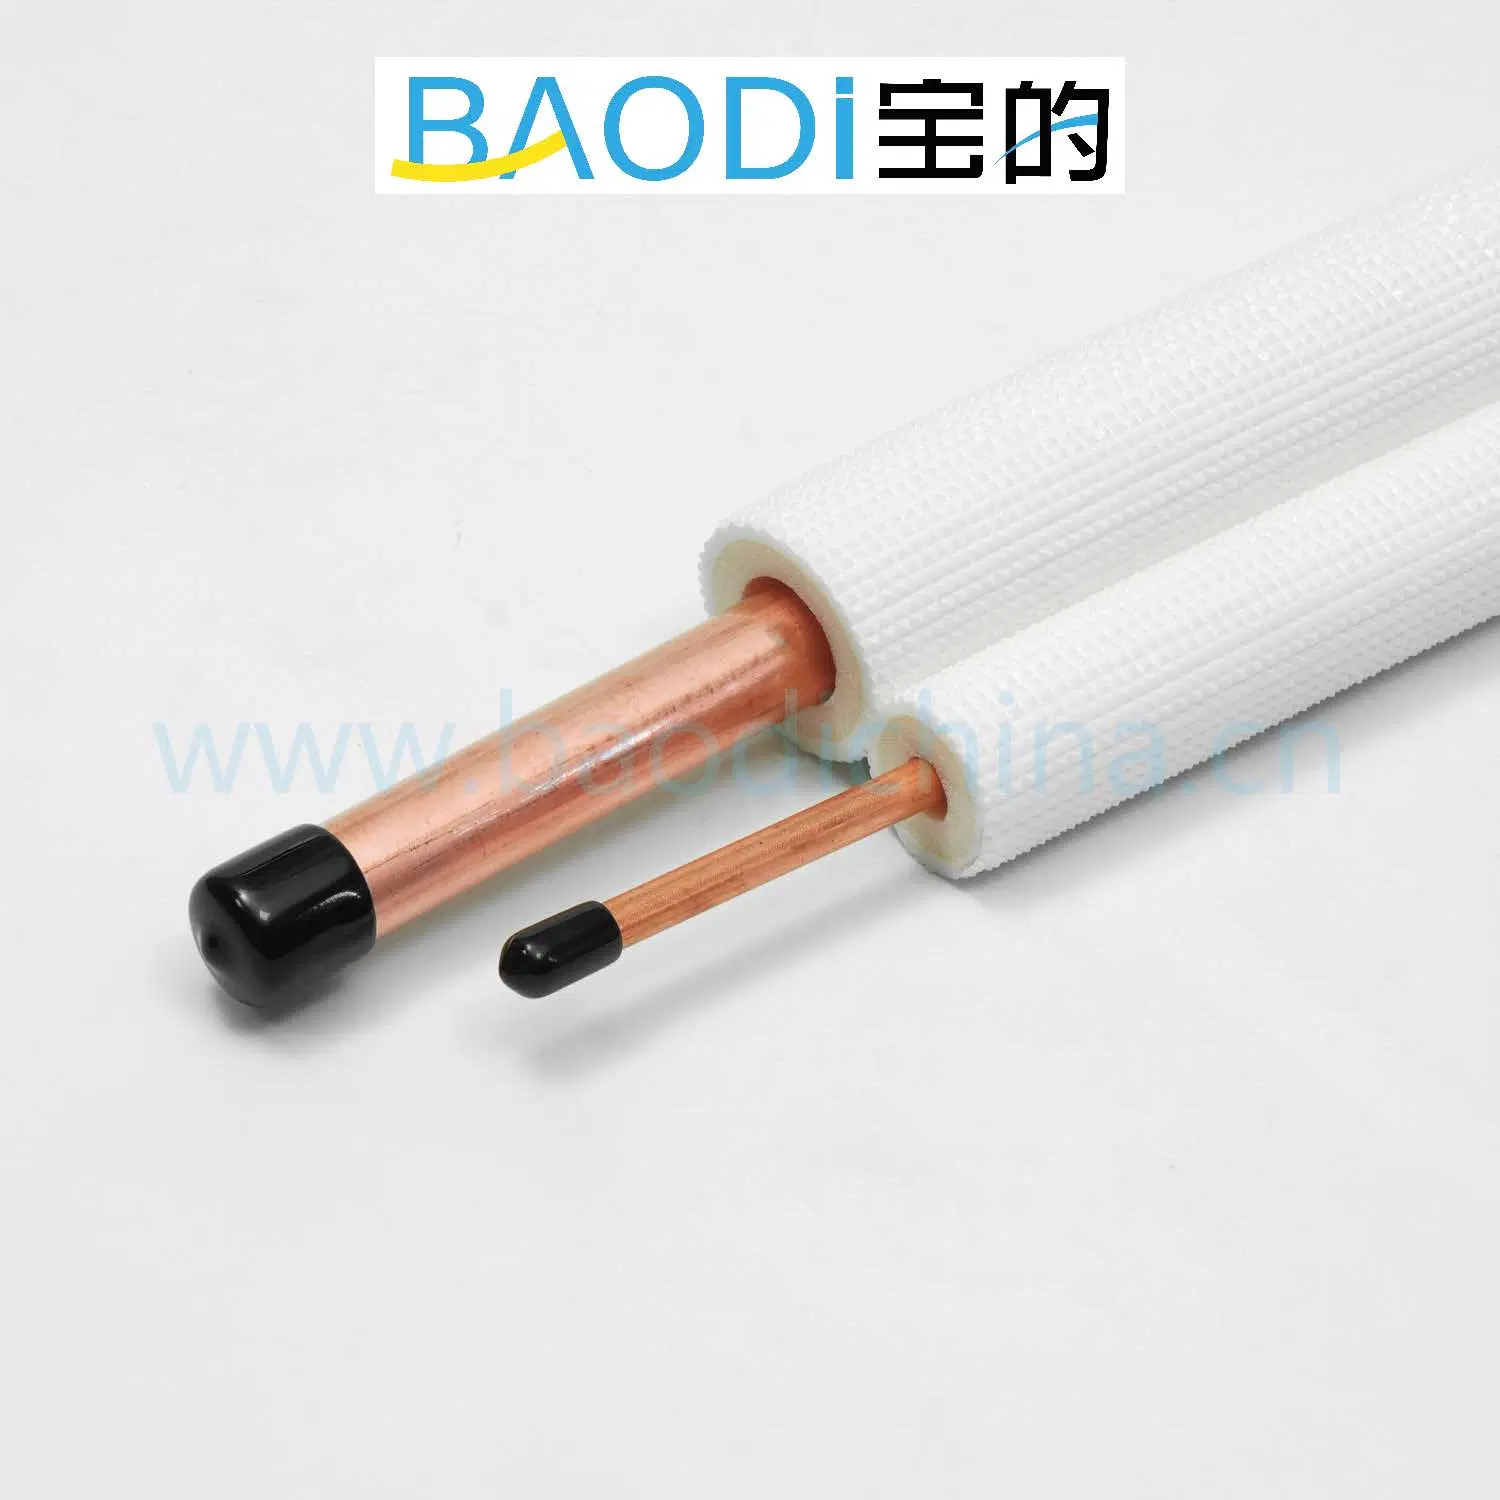 Insulated Copper Wires and Cables European Standard for Air Conditioner Size 1/4, 3/8, 1/2, 5/8, 3/4, 7/8 Installation Pair Coil AC Parts